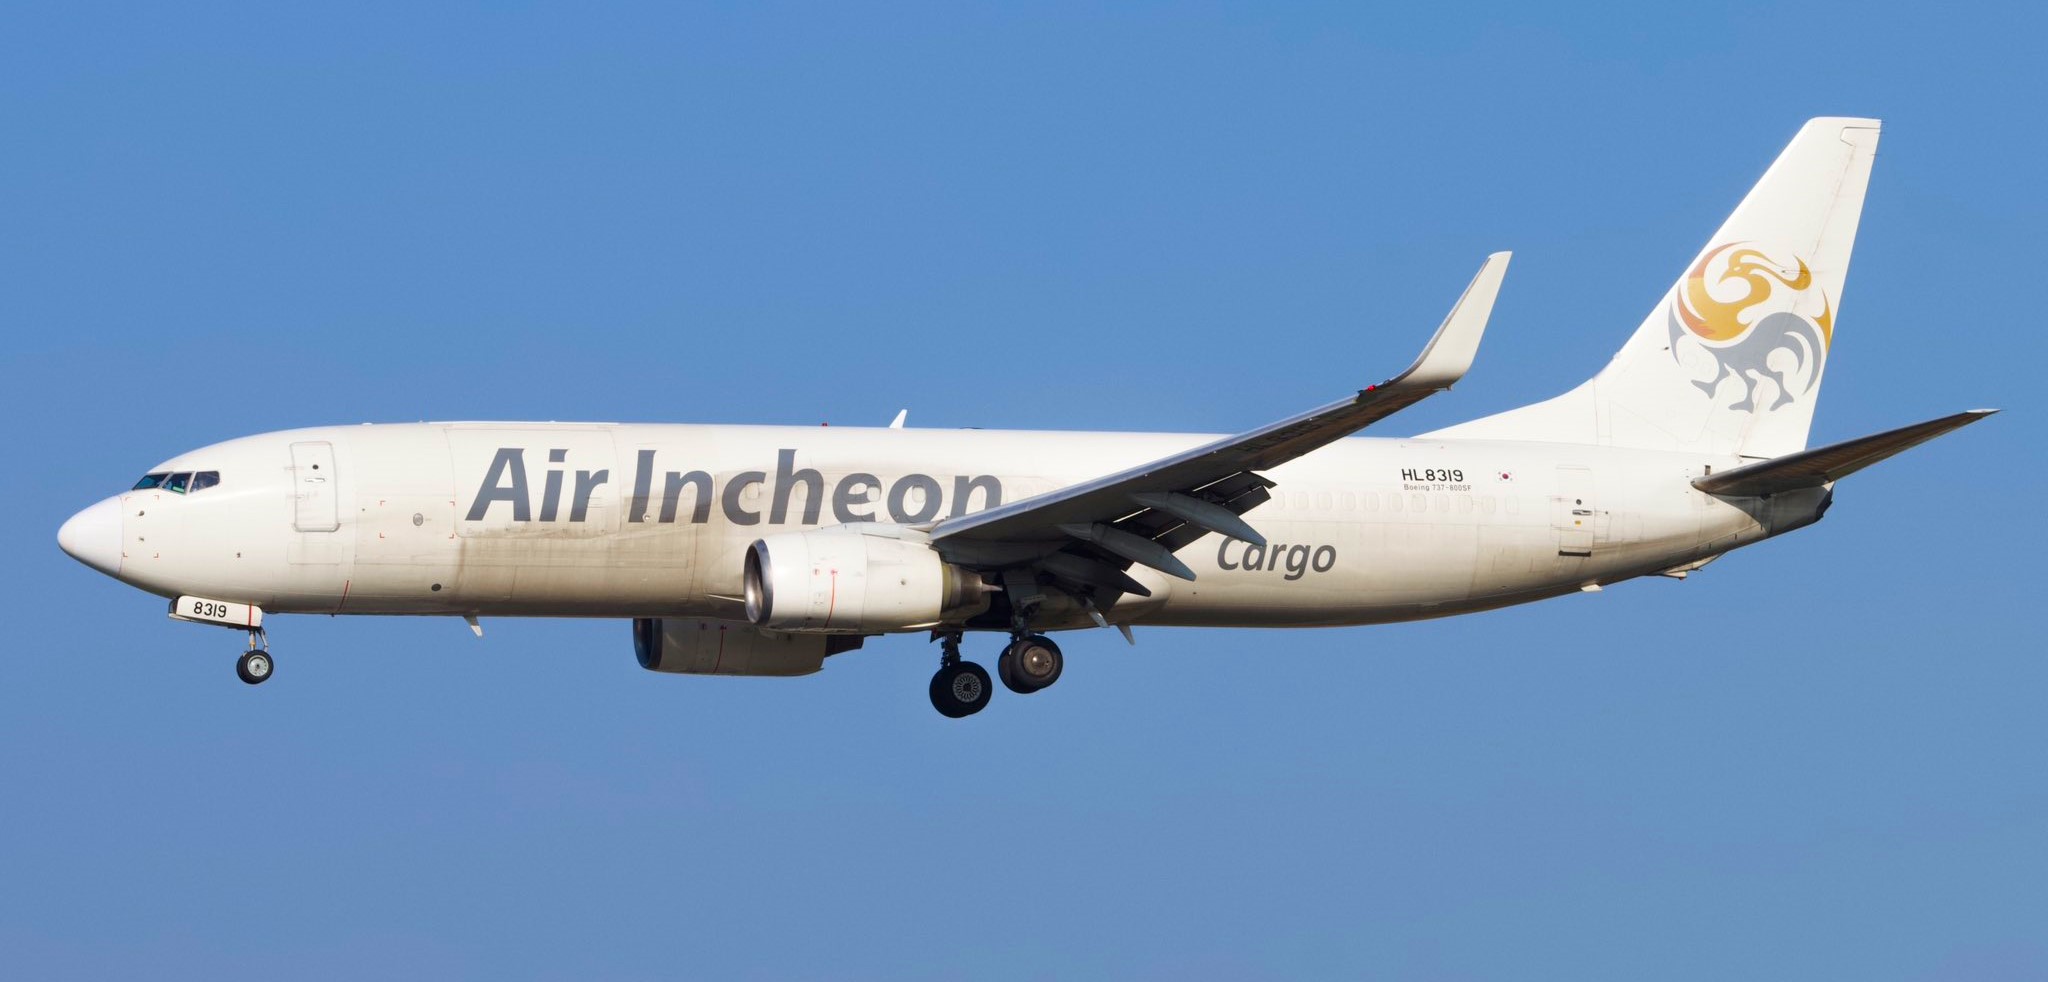 Air Incheon emerges as the preferred buyer of Asiana Airlines cargo business.